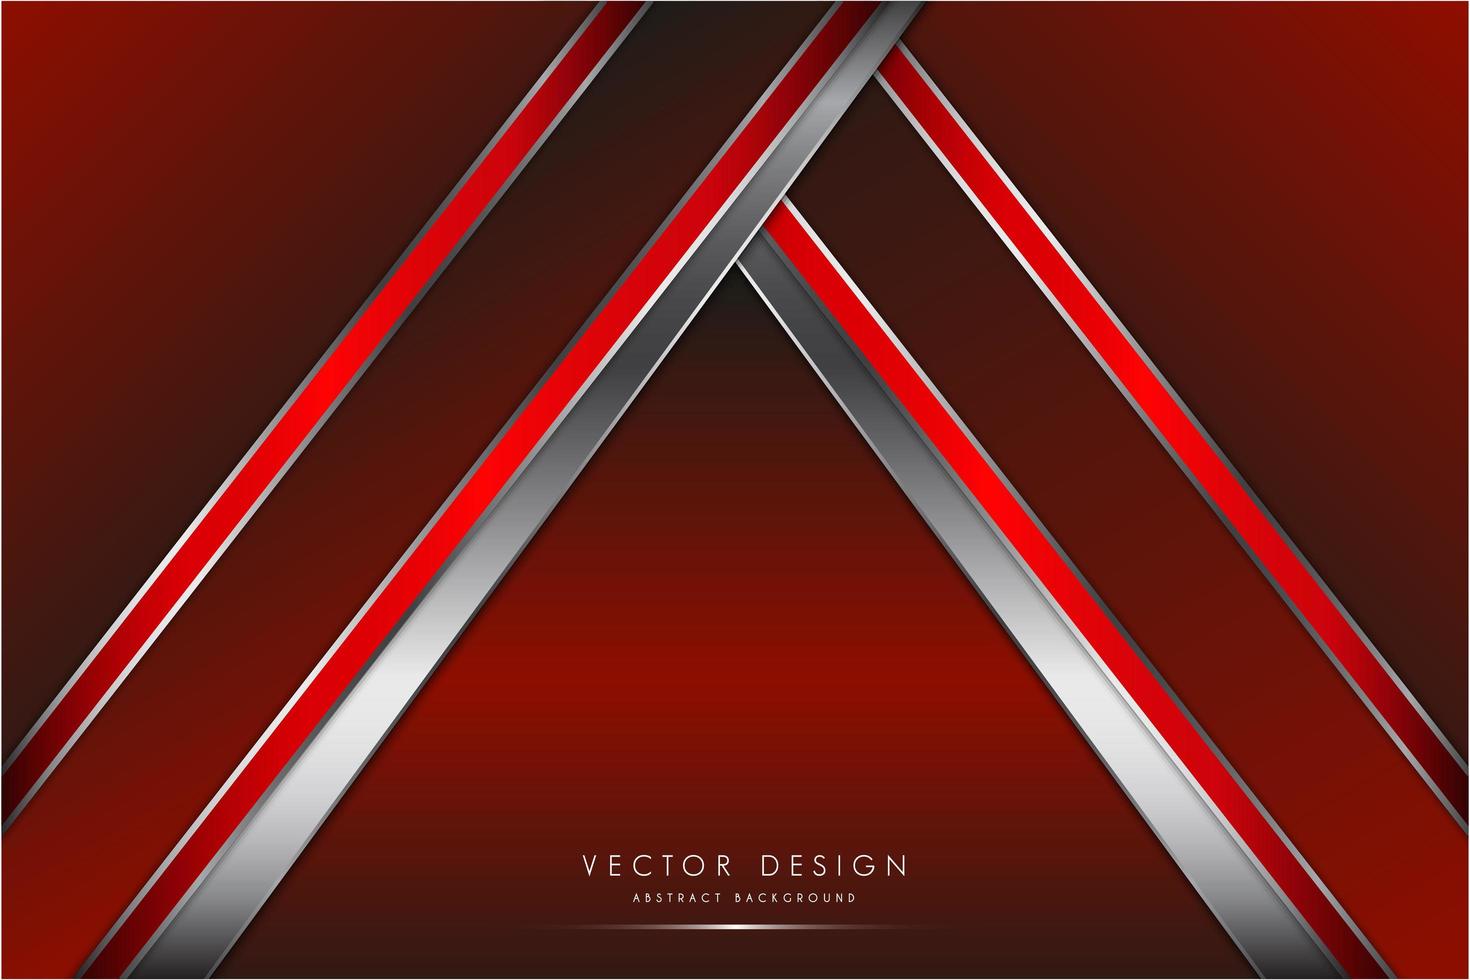 Modern red and silver metallic background vector